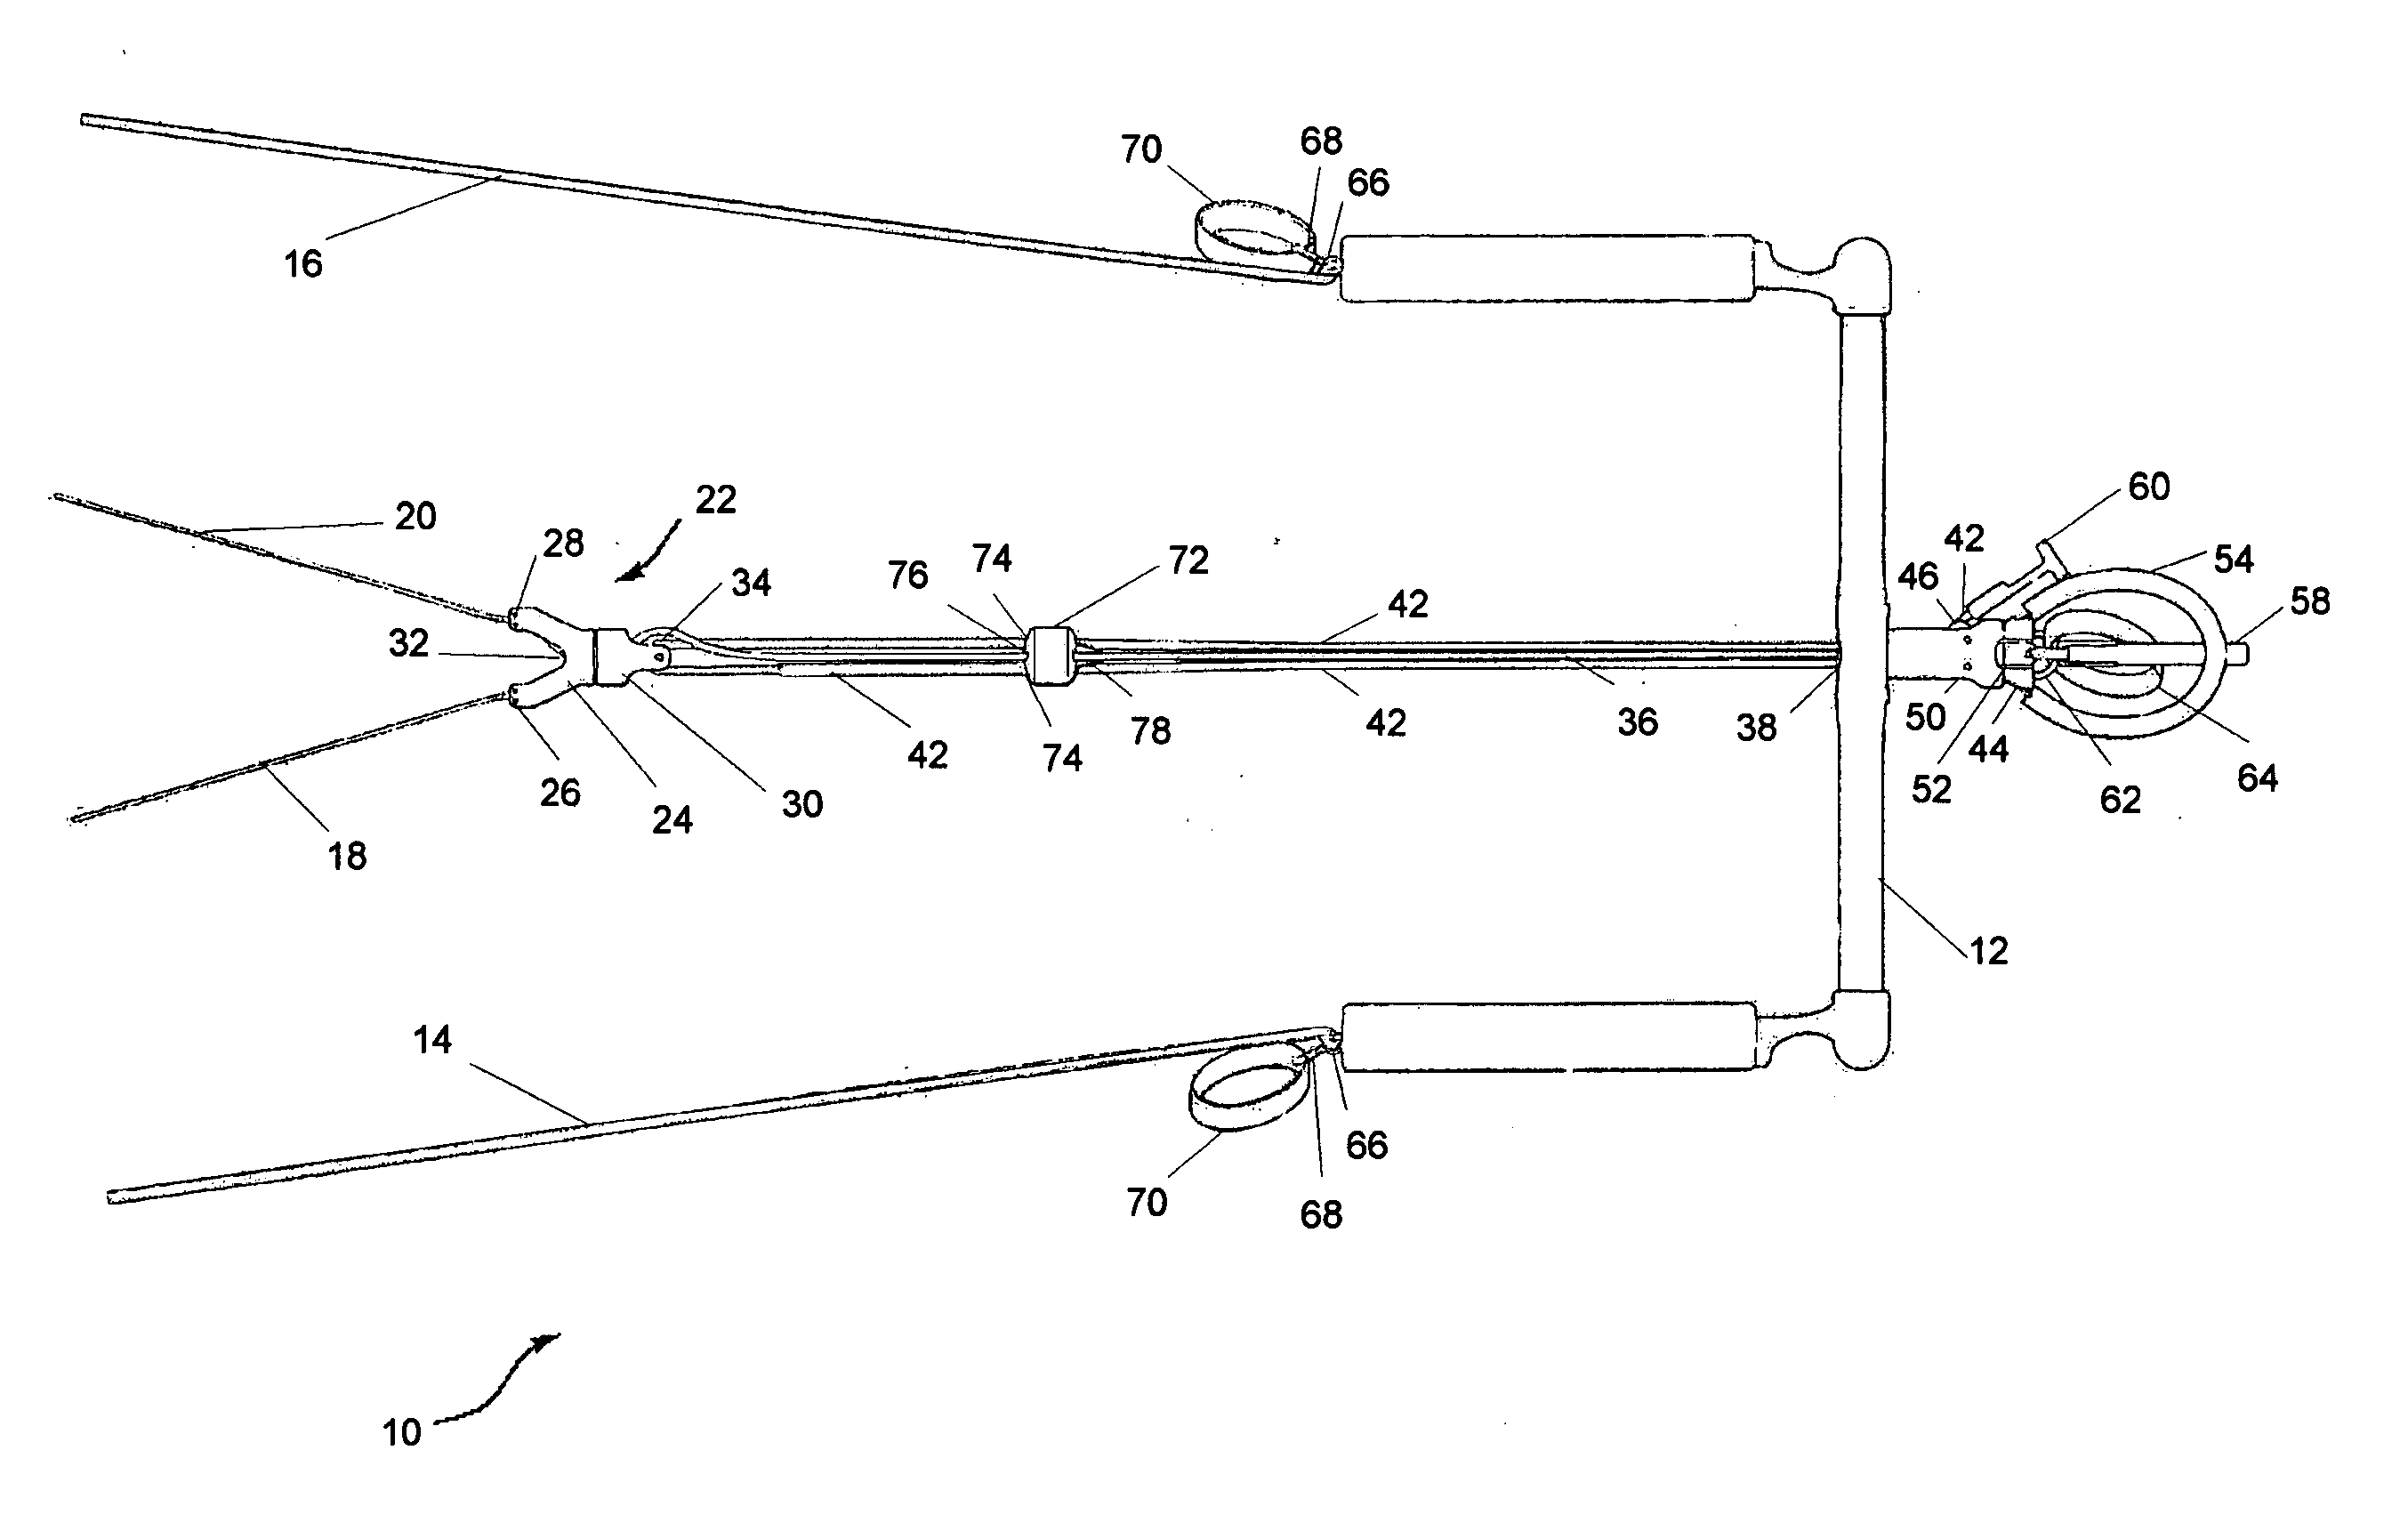 Kite control device with free rotation